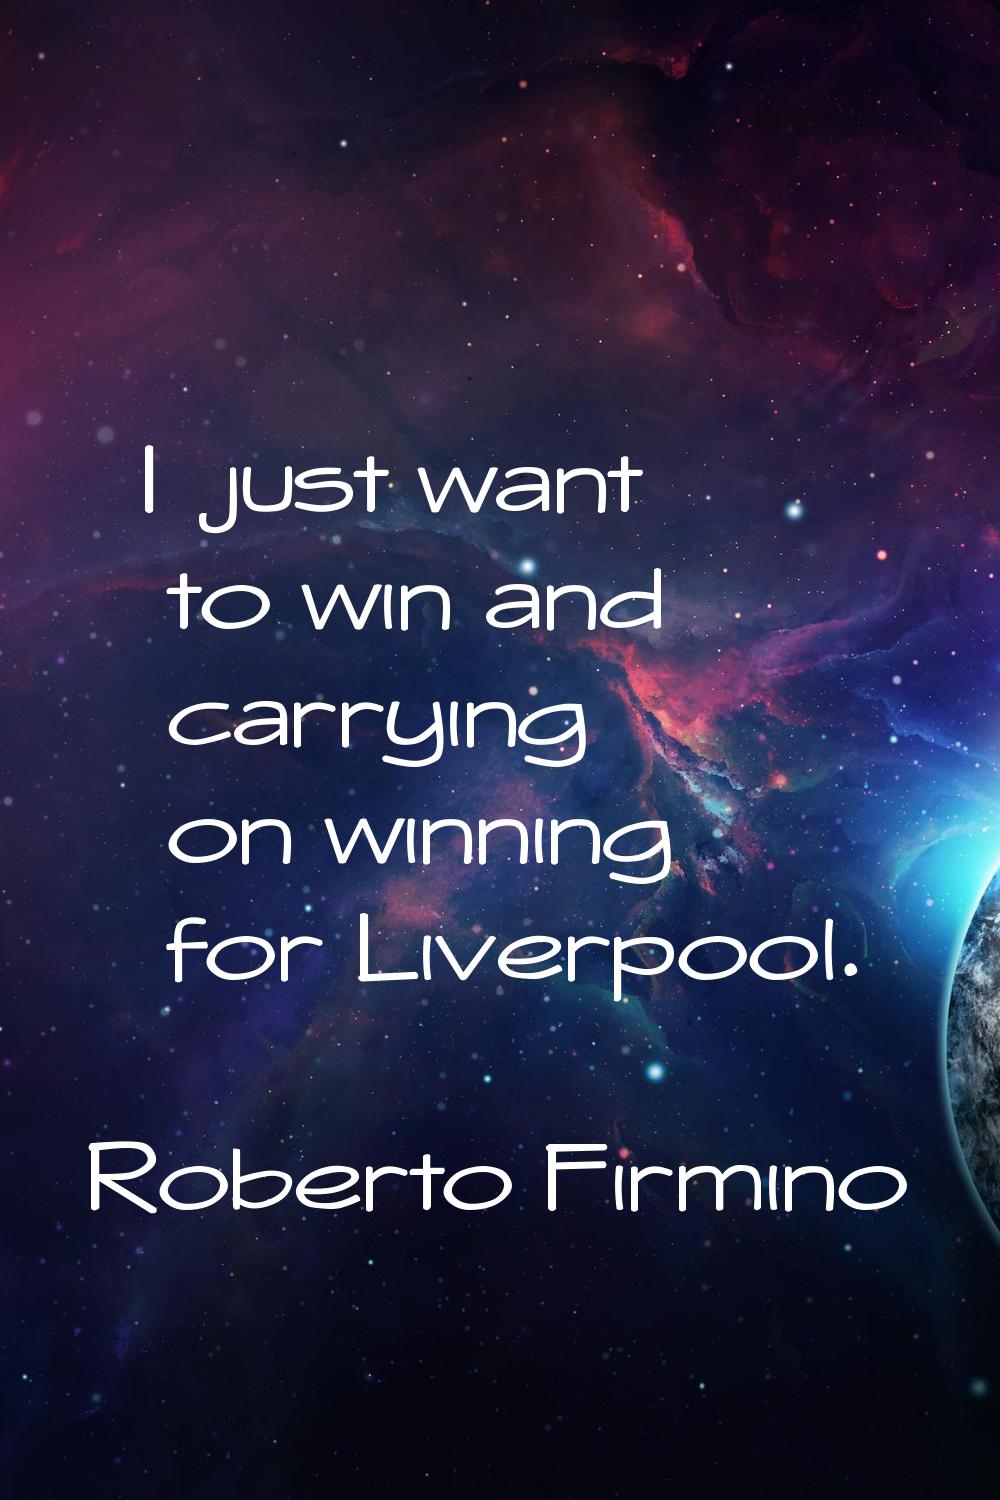 I just want to win and carrying on winning for Liverpool.